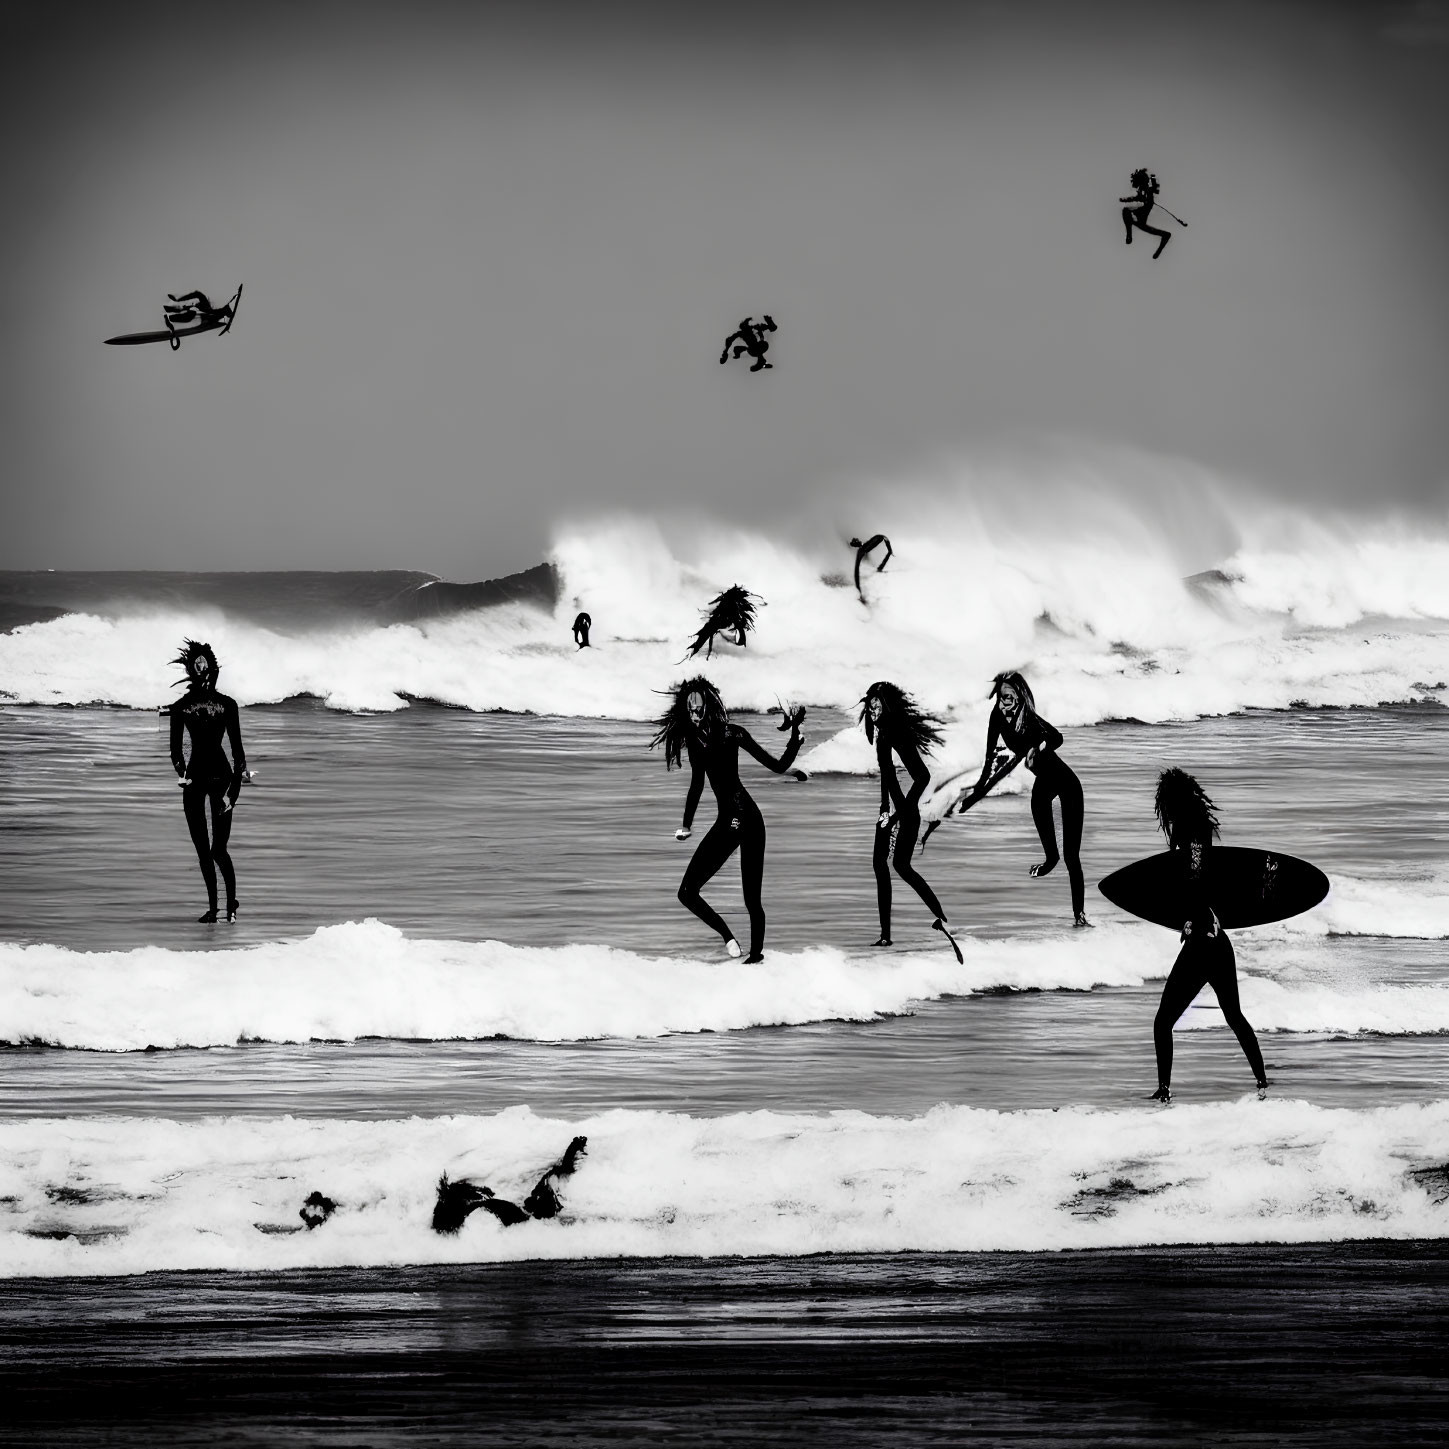 Monochrome image of surfers and seagulls at a busy beach